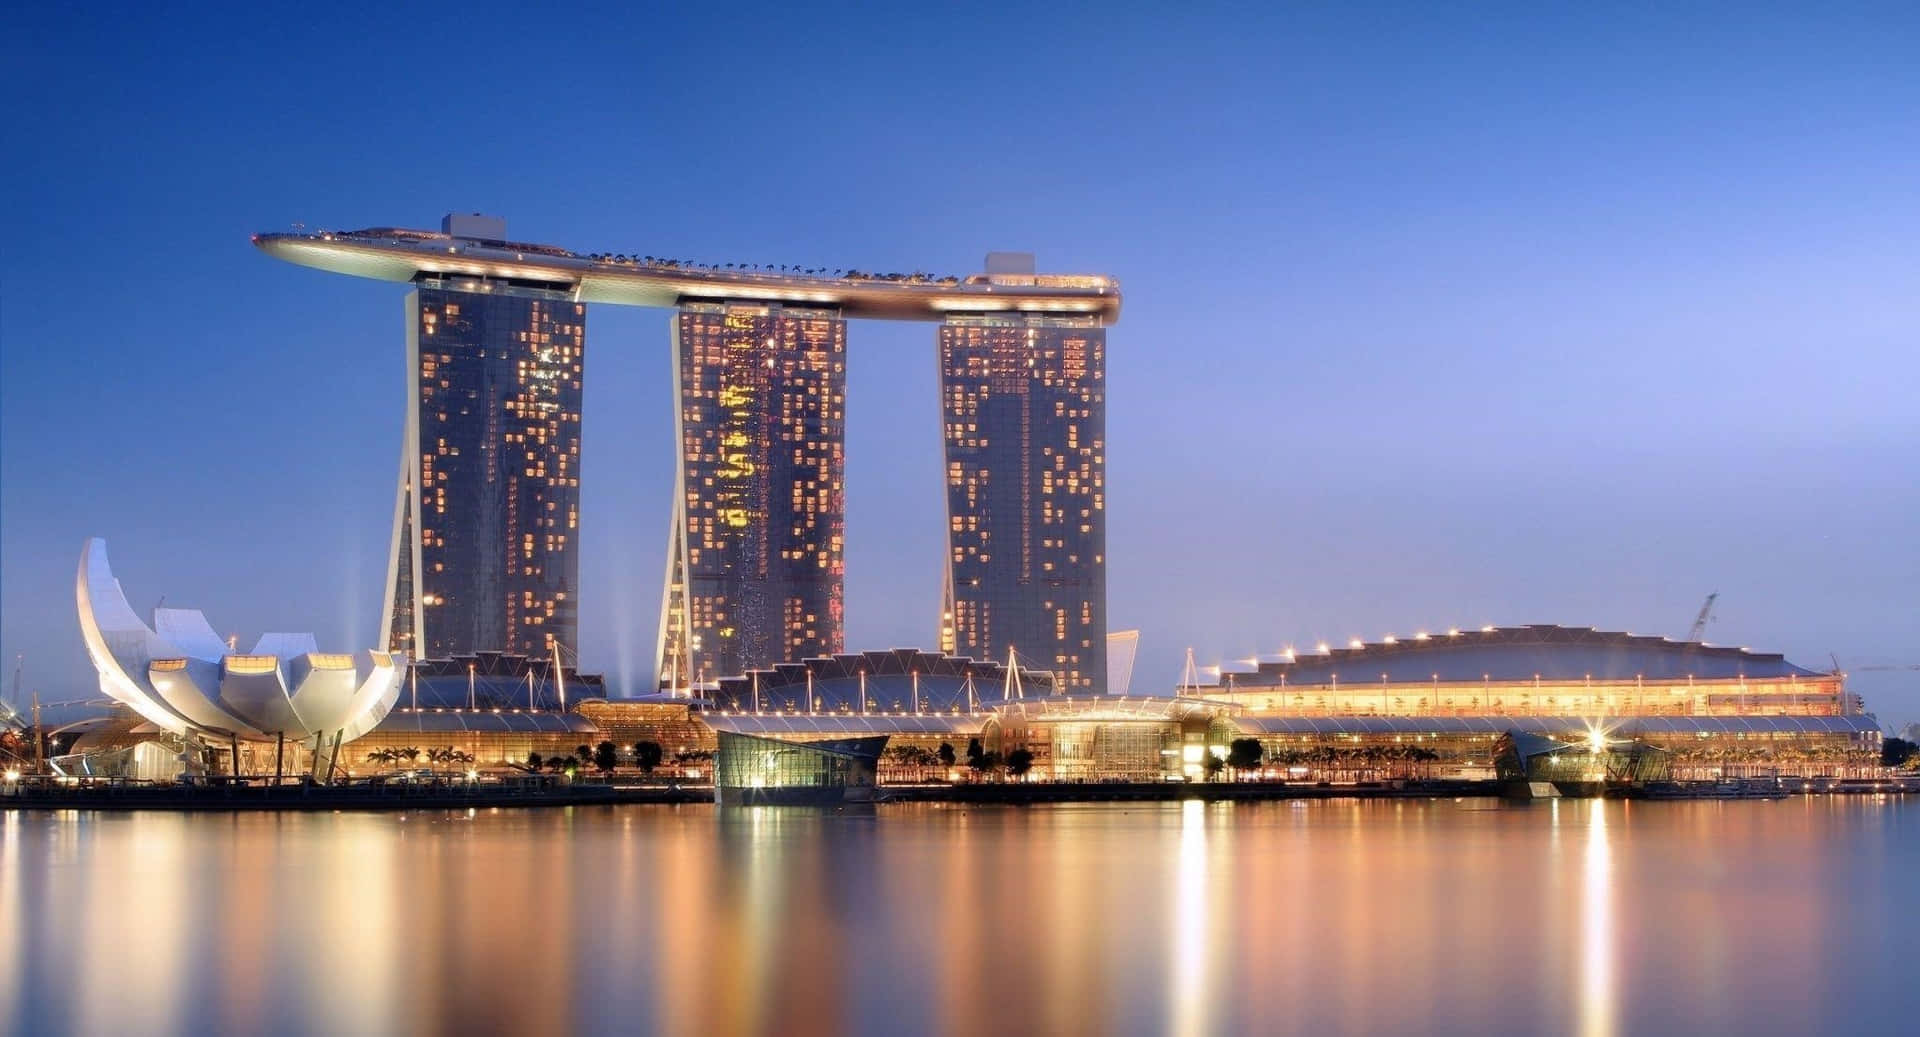 Take in the stunning view of Marina Bay Sands in Singapore